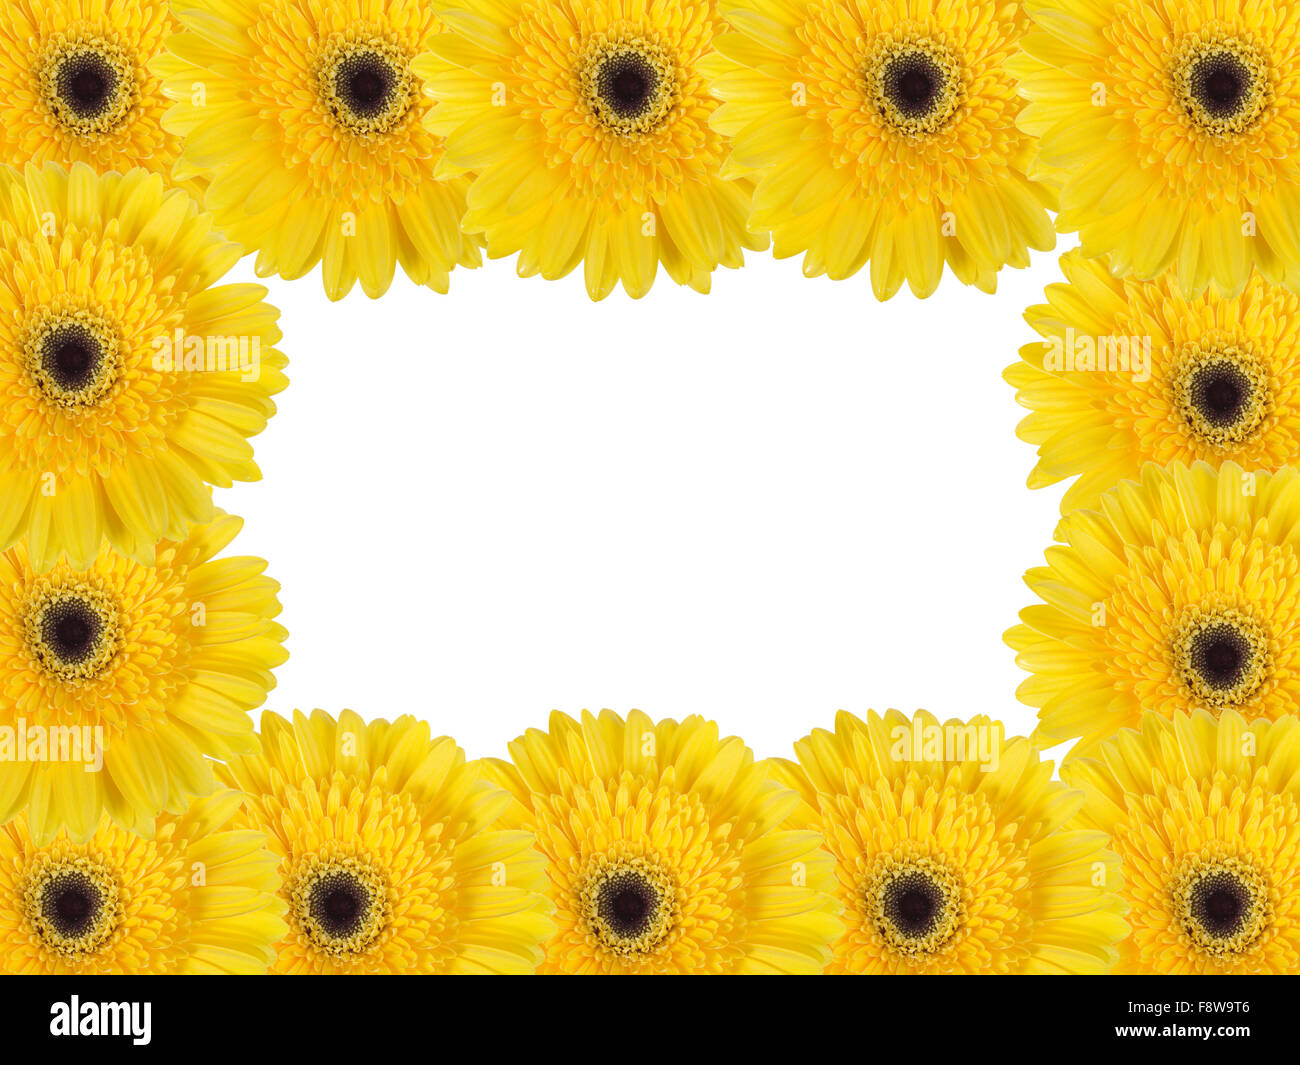 Abstract frame with yellow flowers Stock Photo